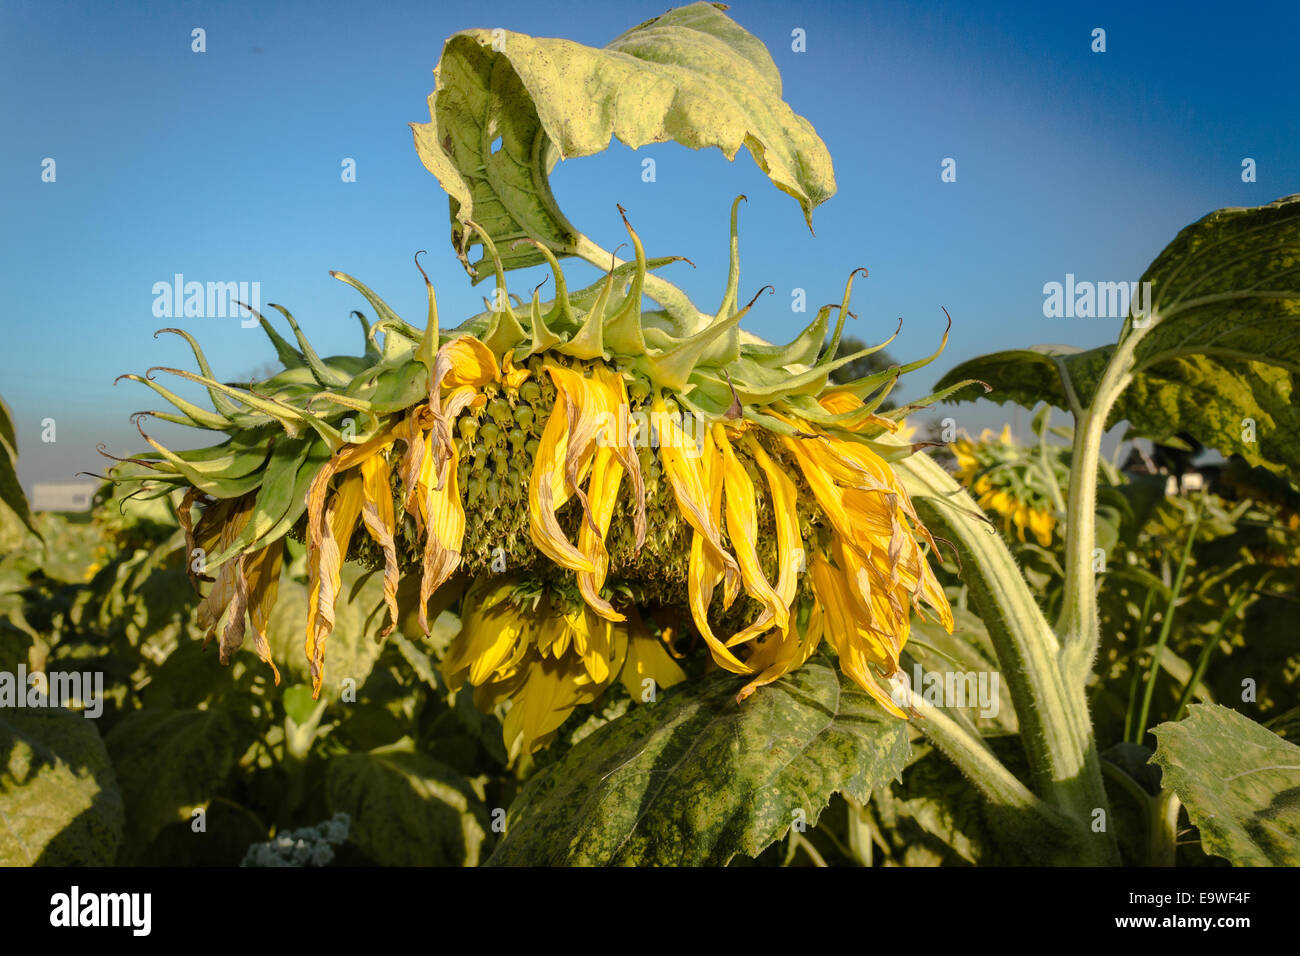 Closeup of a sunflower (Helianthus annuus) in a field of sunflowers in a sunny summer day in Italy: yellow petals, orange and yellow stame with dark yellow pistil. White spotted Light green curly leaves Stock Photo